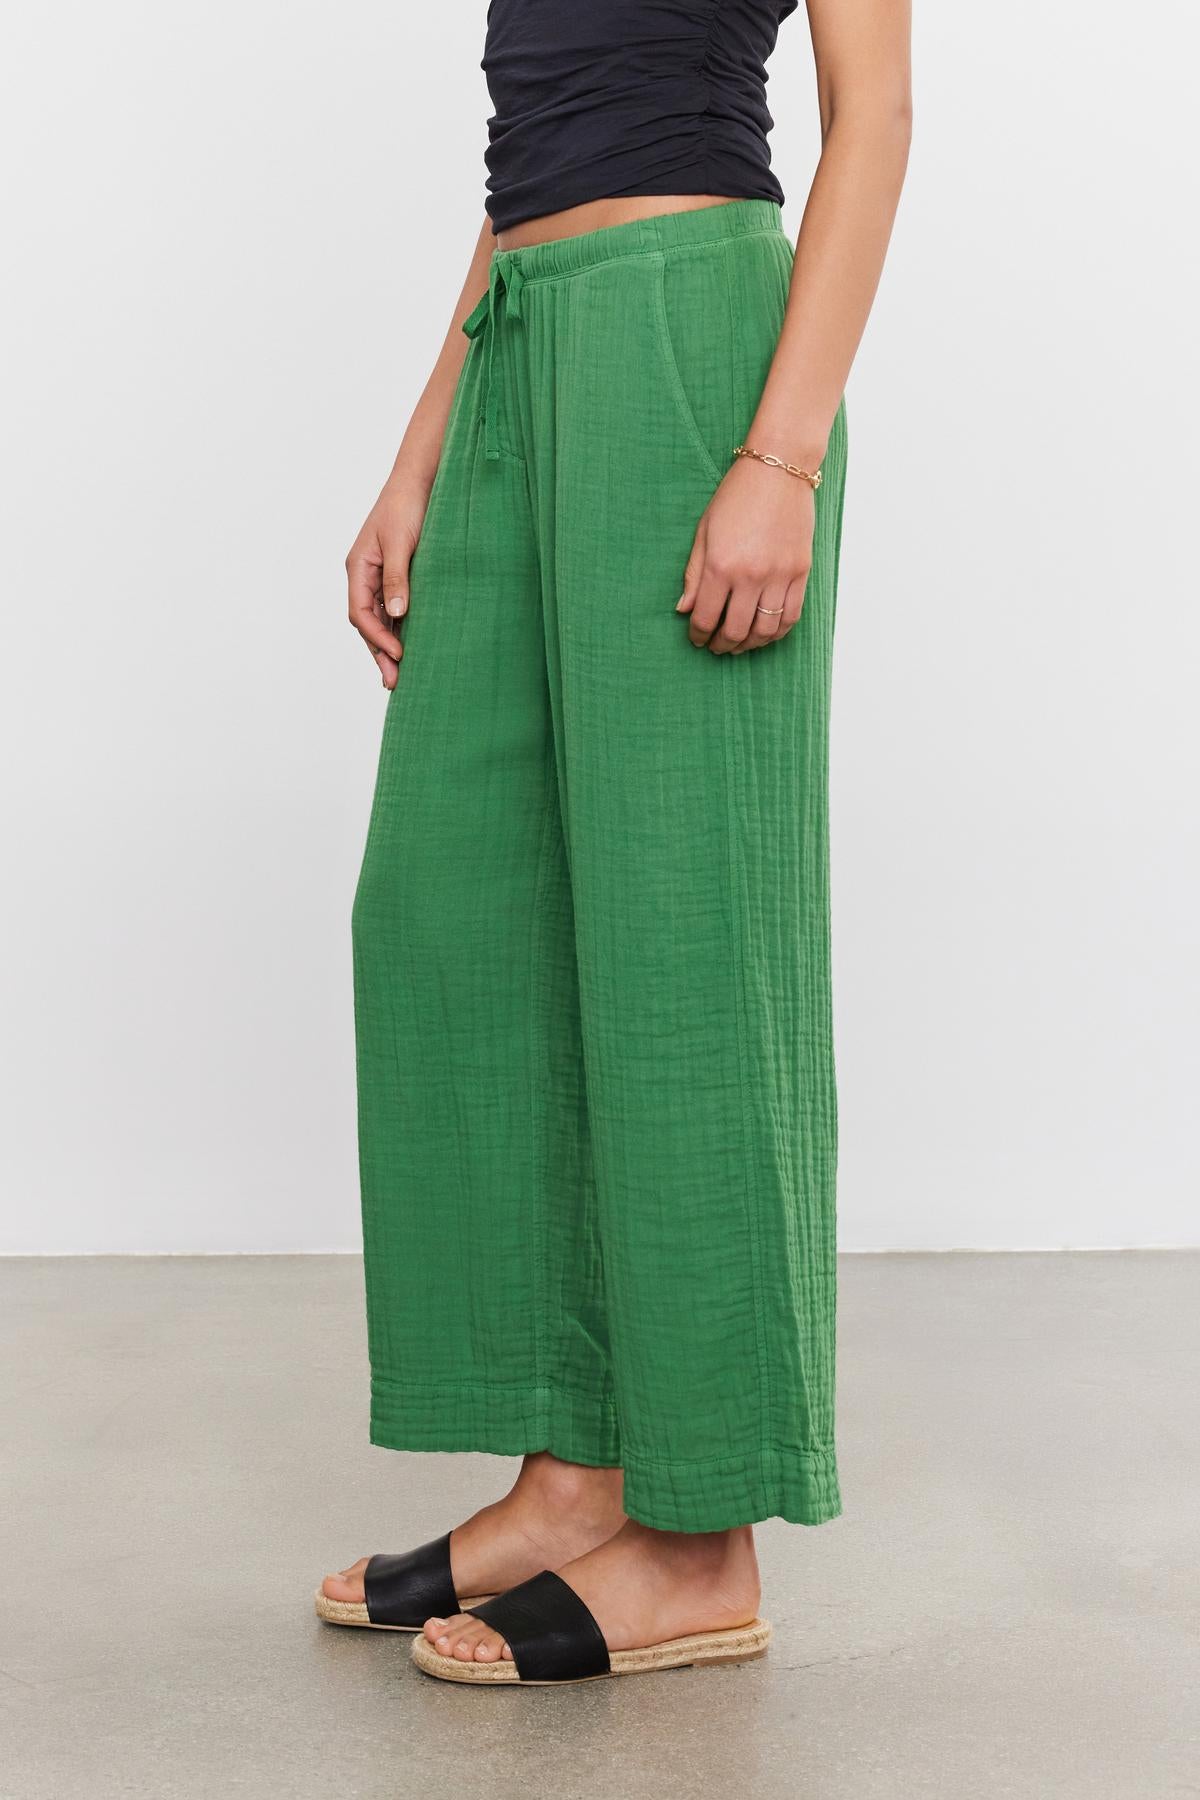   A person wearing green FRANNY COTTON GAUZE PANTS by Velvet by Graham & Spencer with relaxed legs and slash pockets, paired with black slide sandals, standing against a white background. 